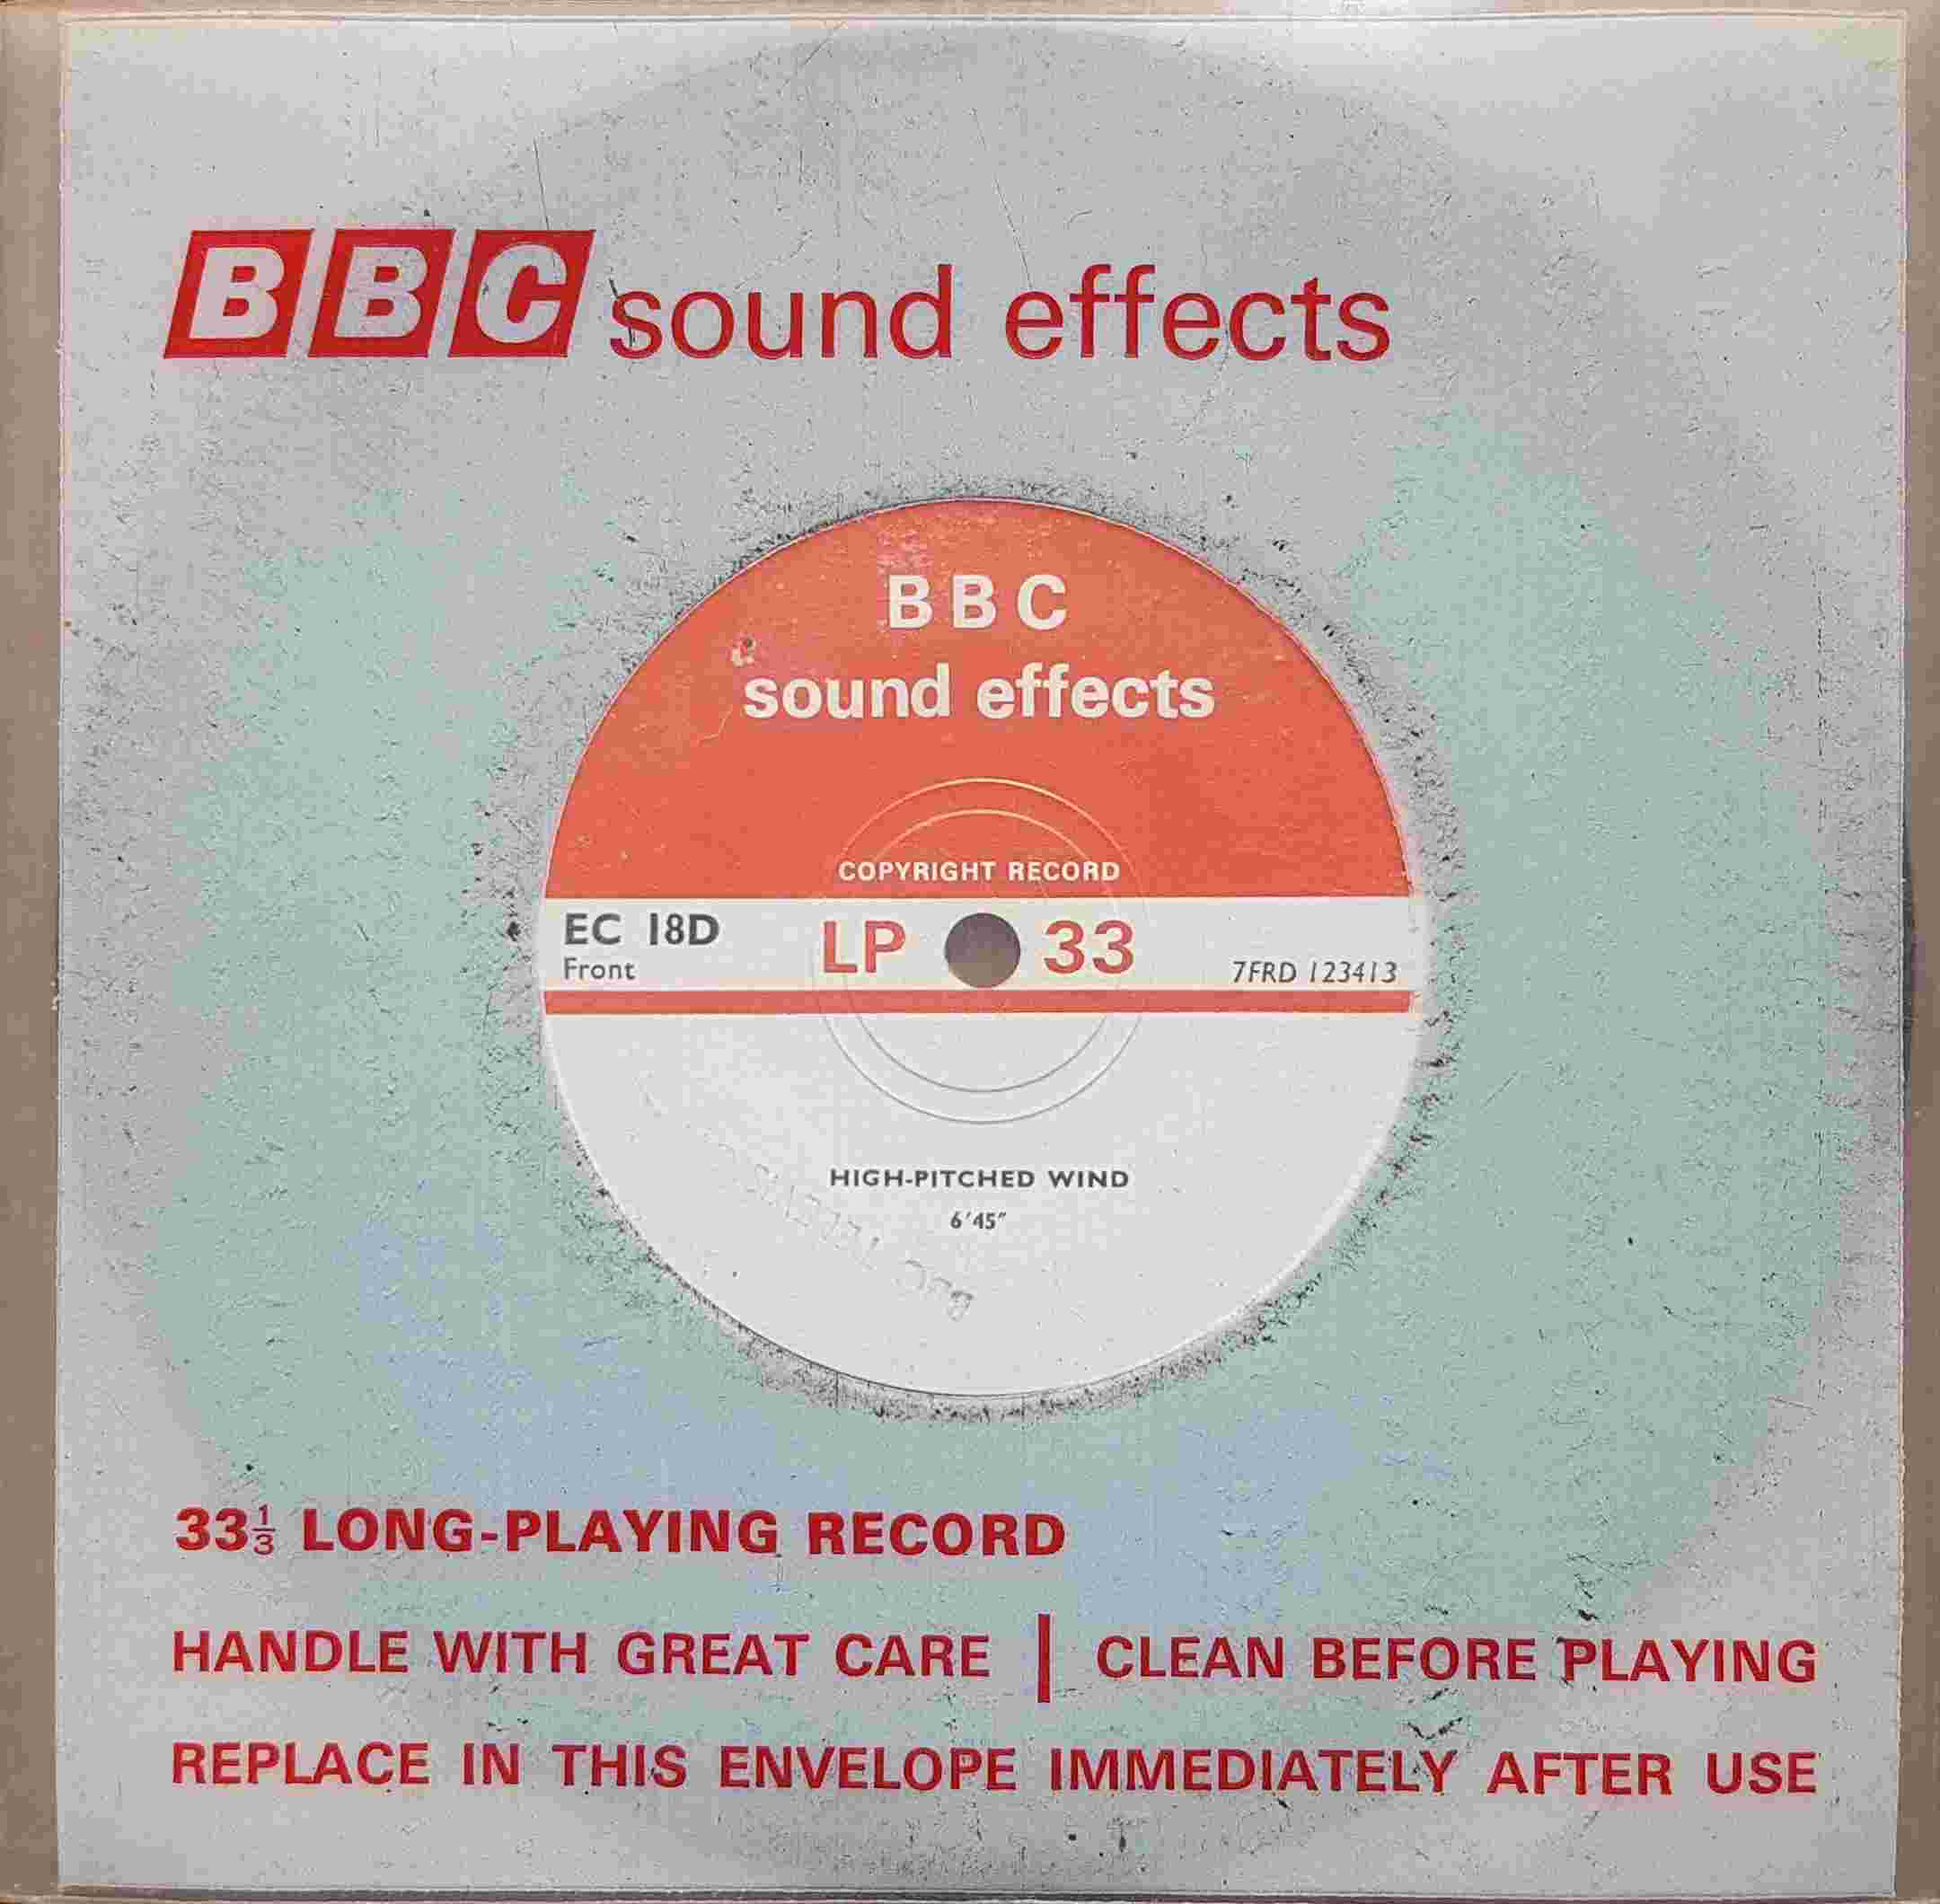 Picture of EC 18D Wind by artist Not registered from the BBC singles - Records and Tapes library